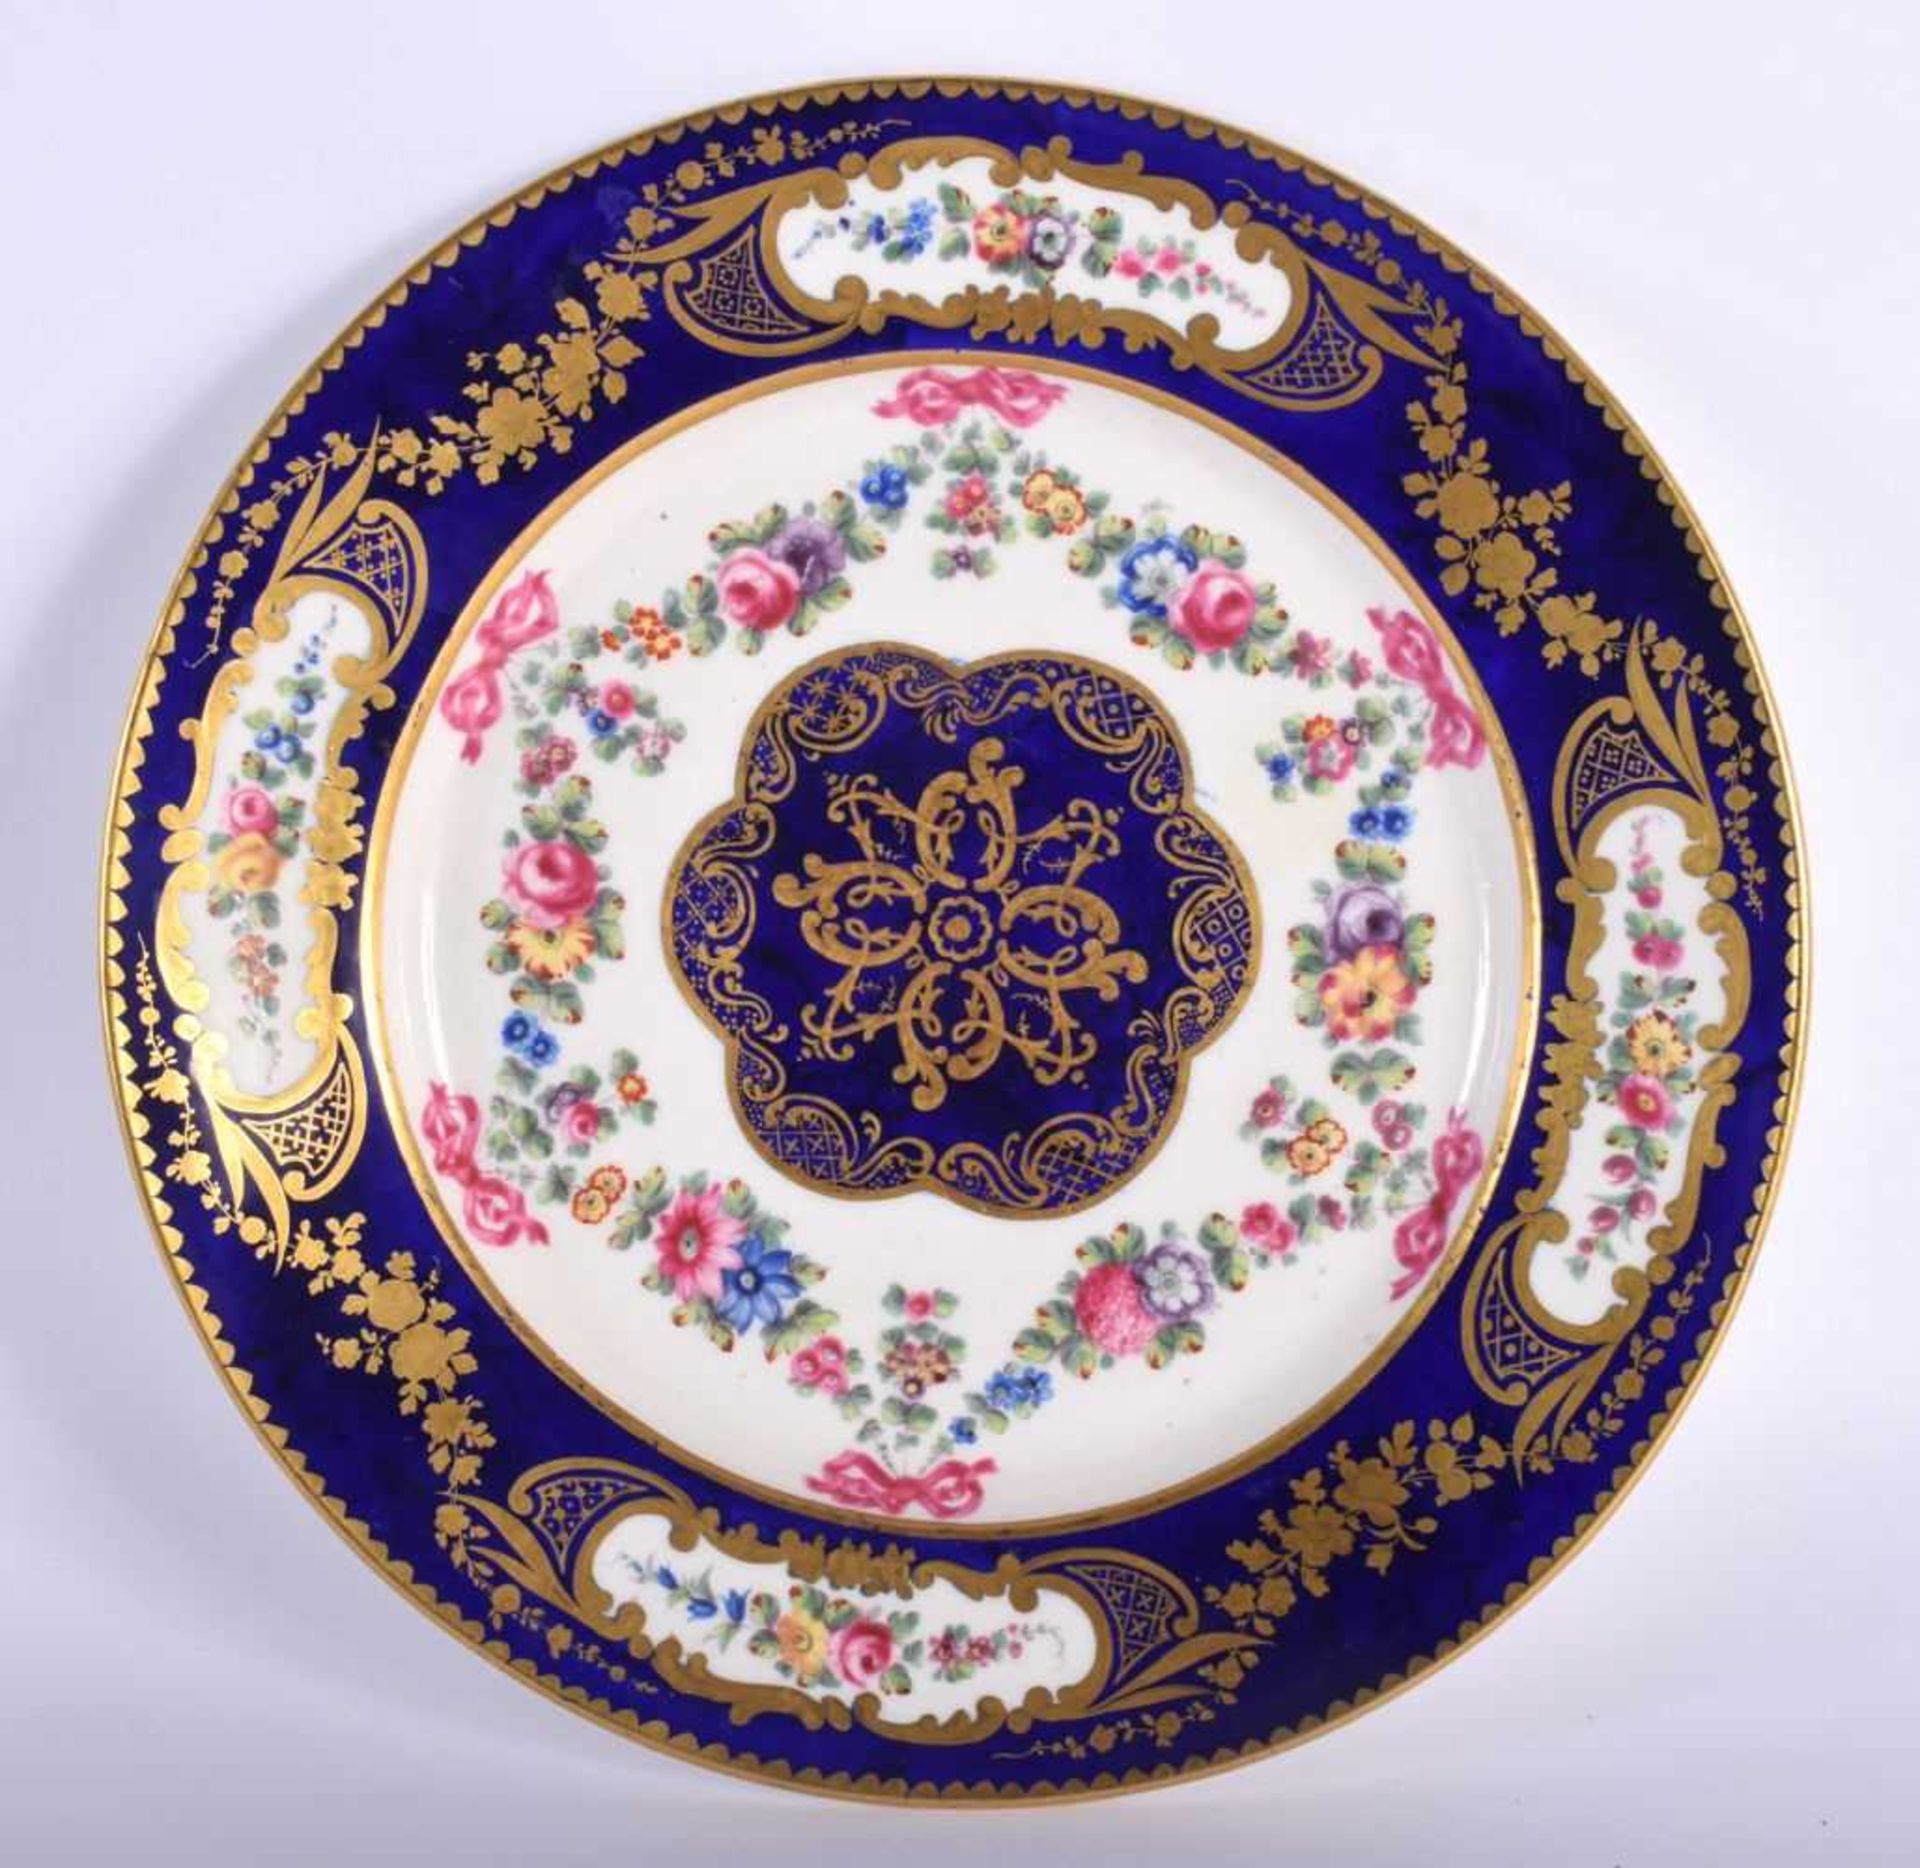 Sevres plate, the border painted in cobalt blue with four oval panels of flowers, the centre with